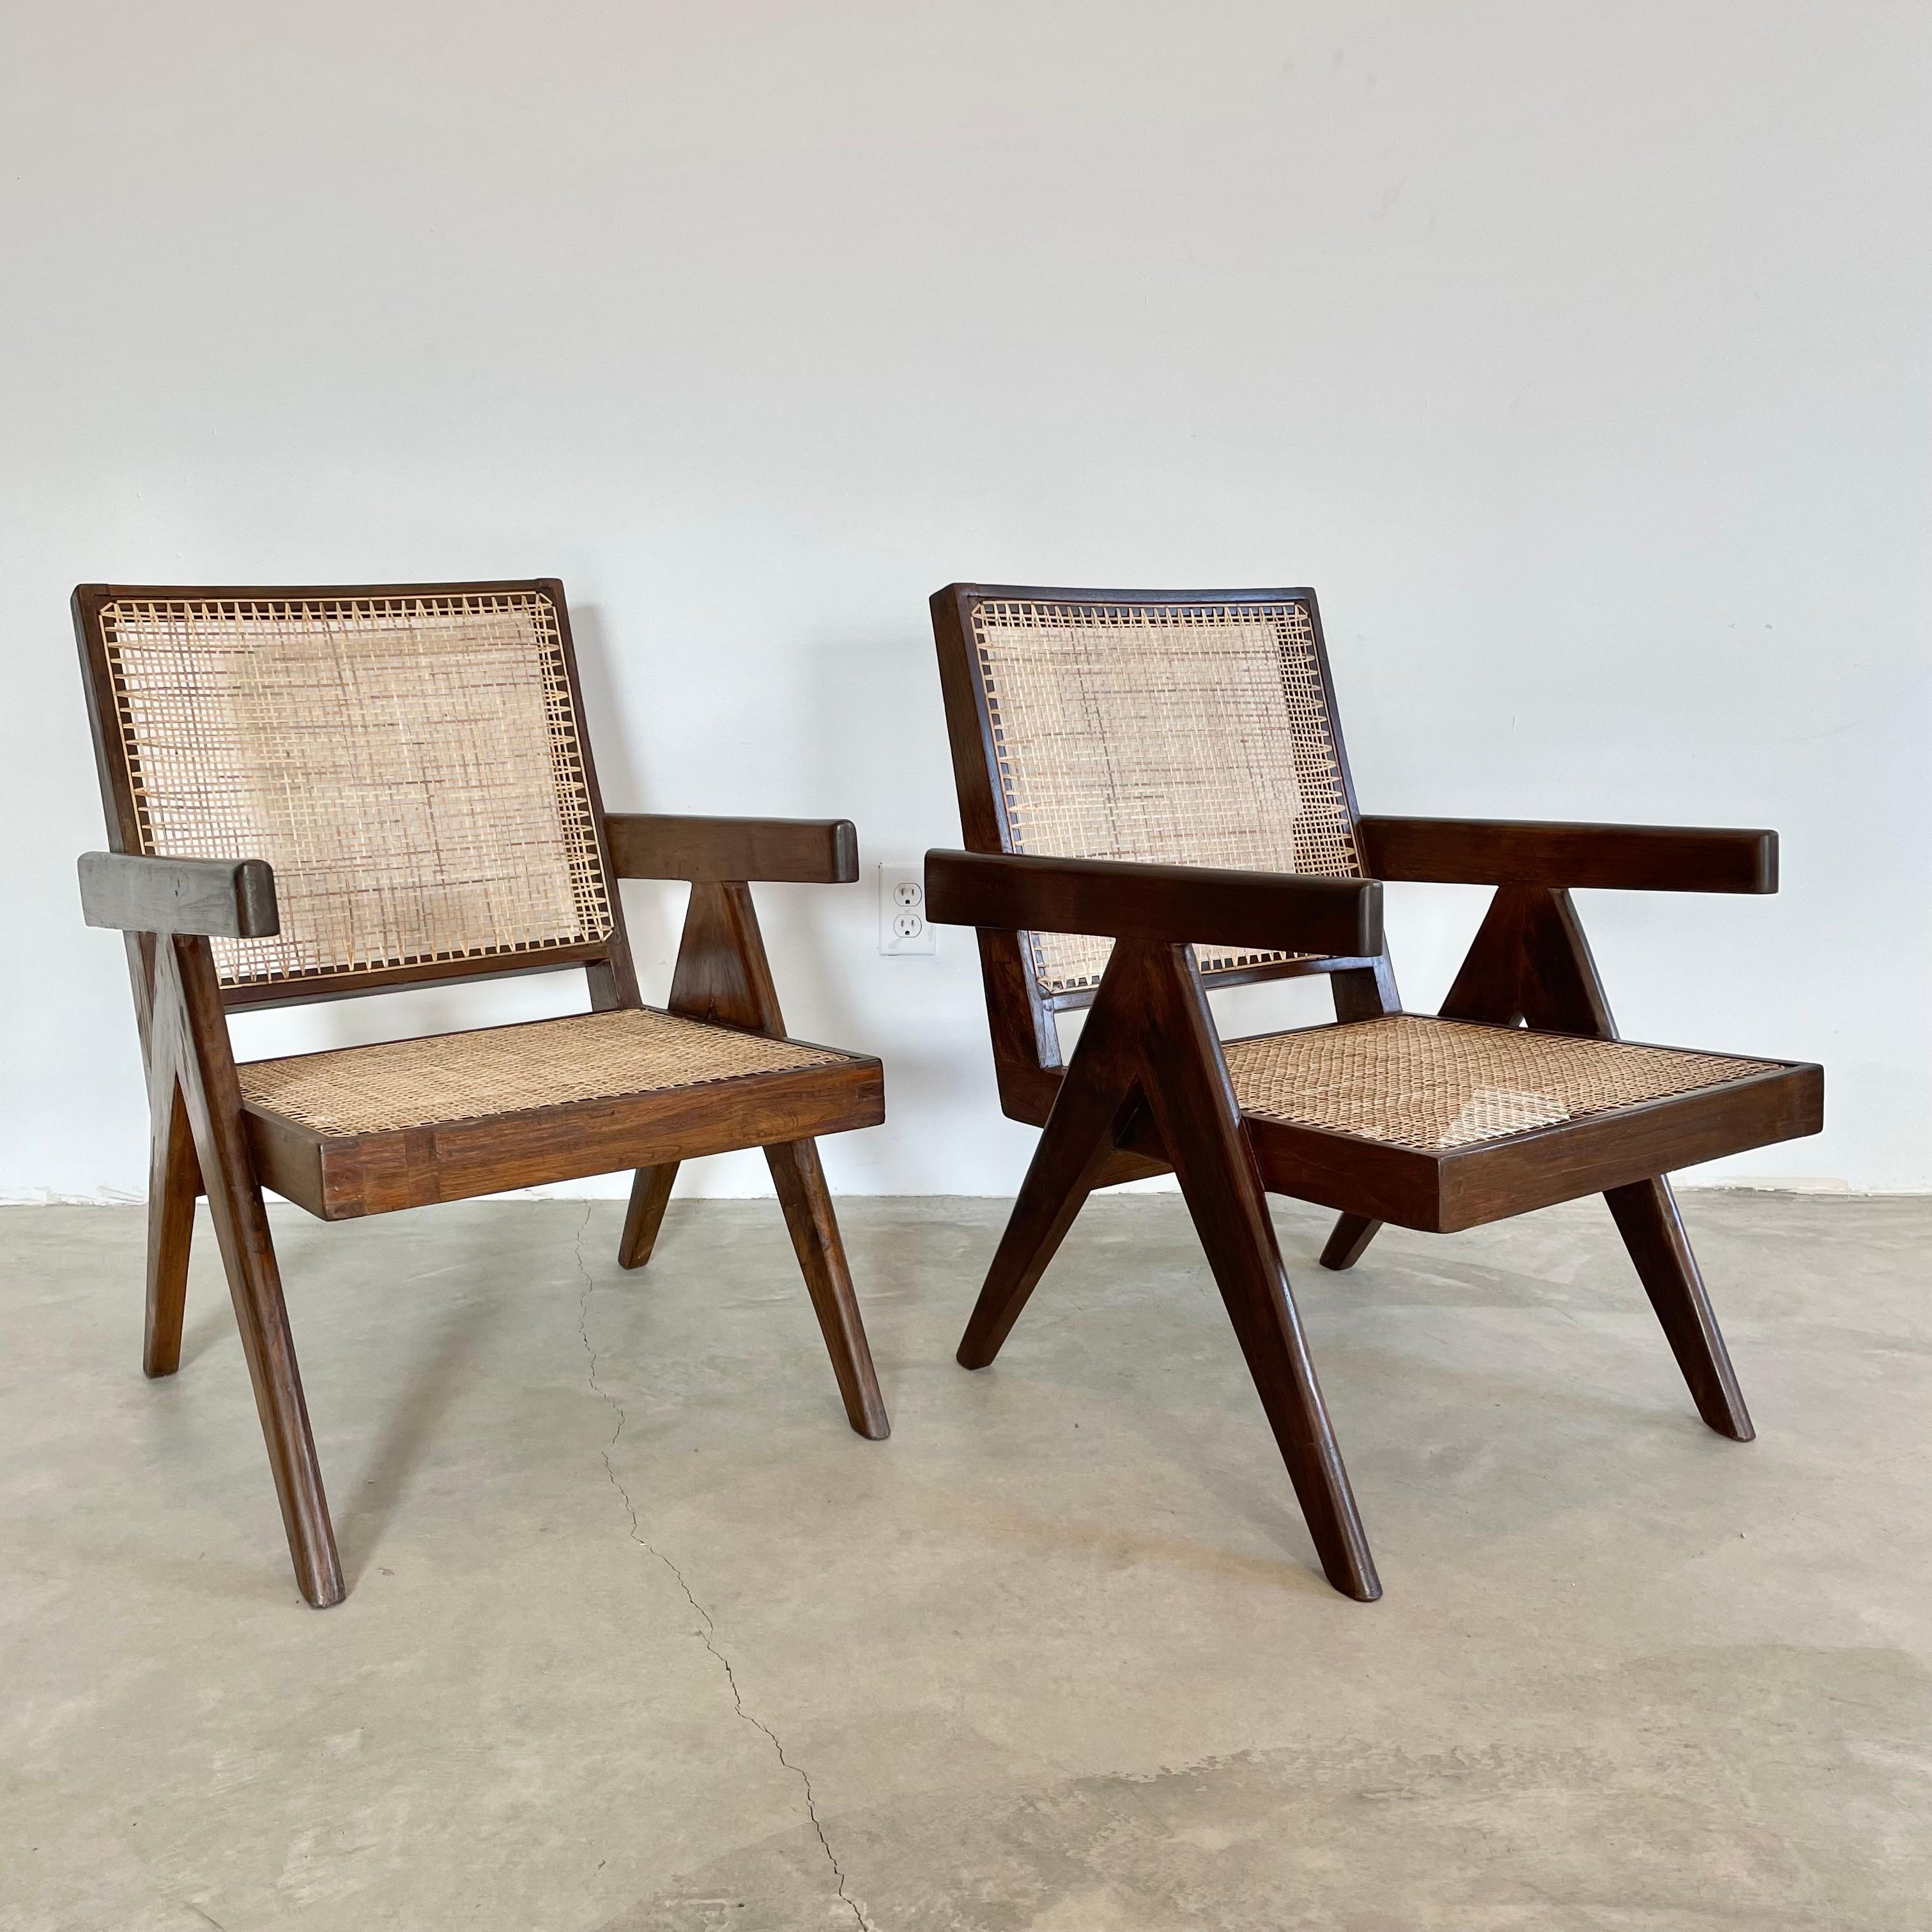 Mid-20th Century Pierre Jeanneret Easy Chairs, 1950s Chandigargh For Sale